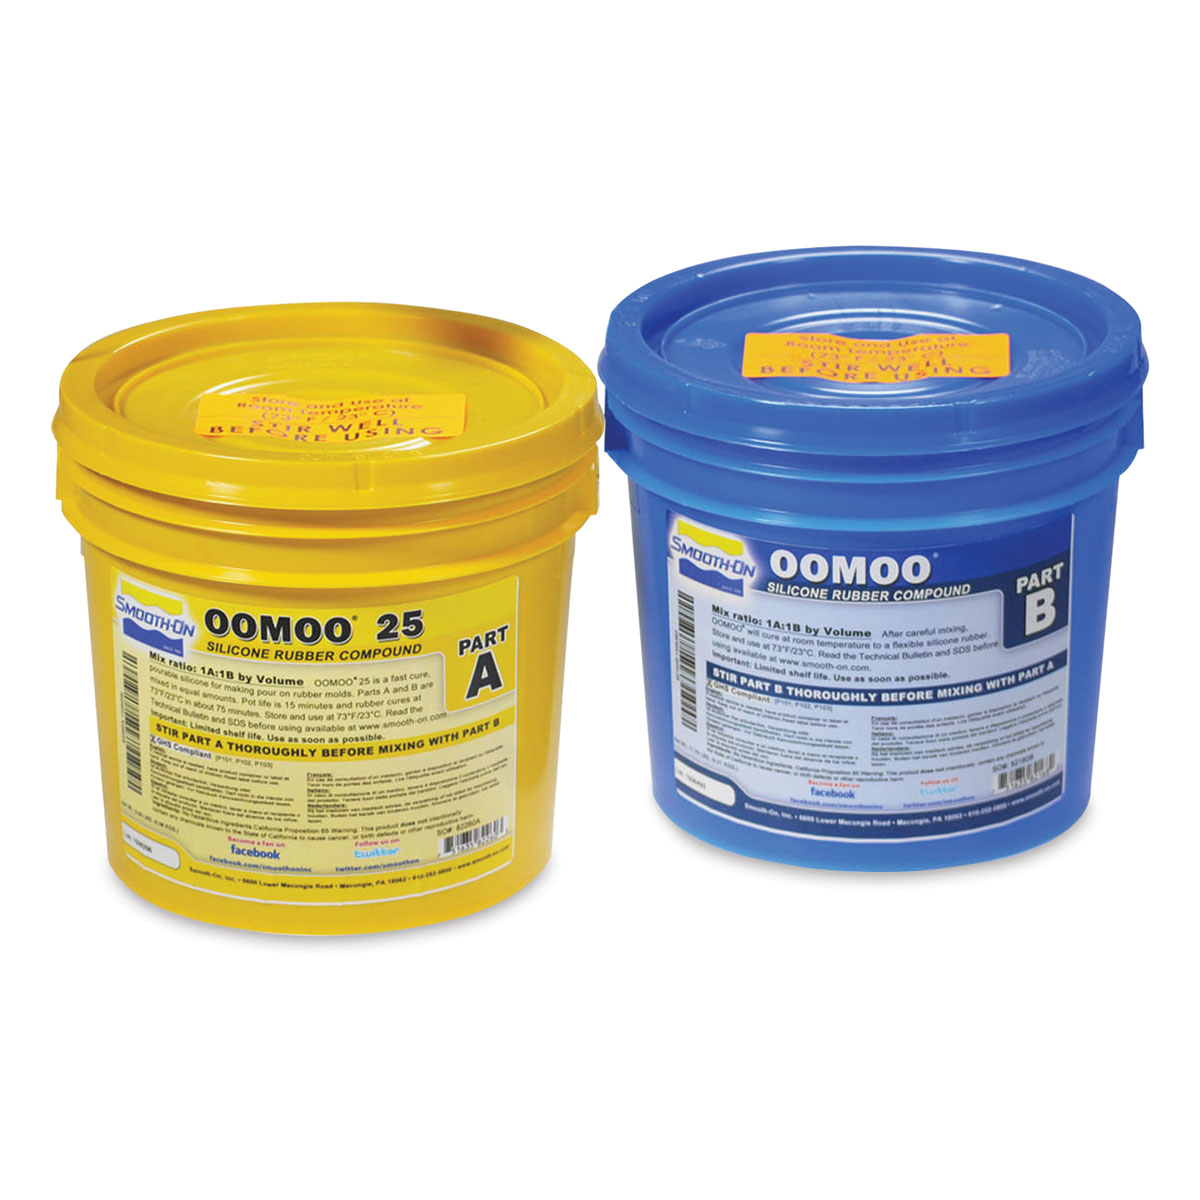 Smooth-On Oomoo 25 Silicone Rubber, 2.8 lbs 